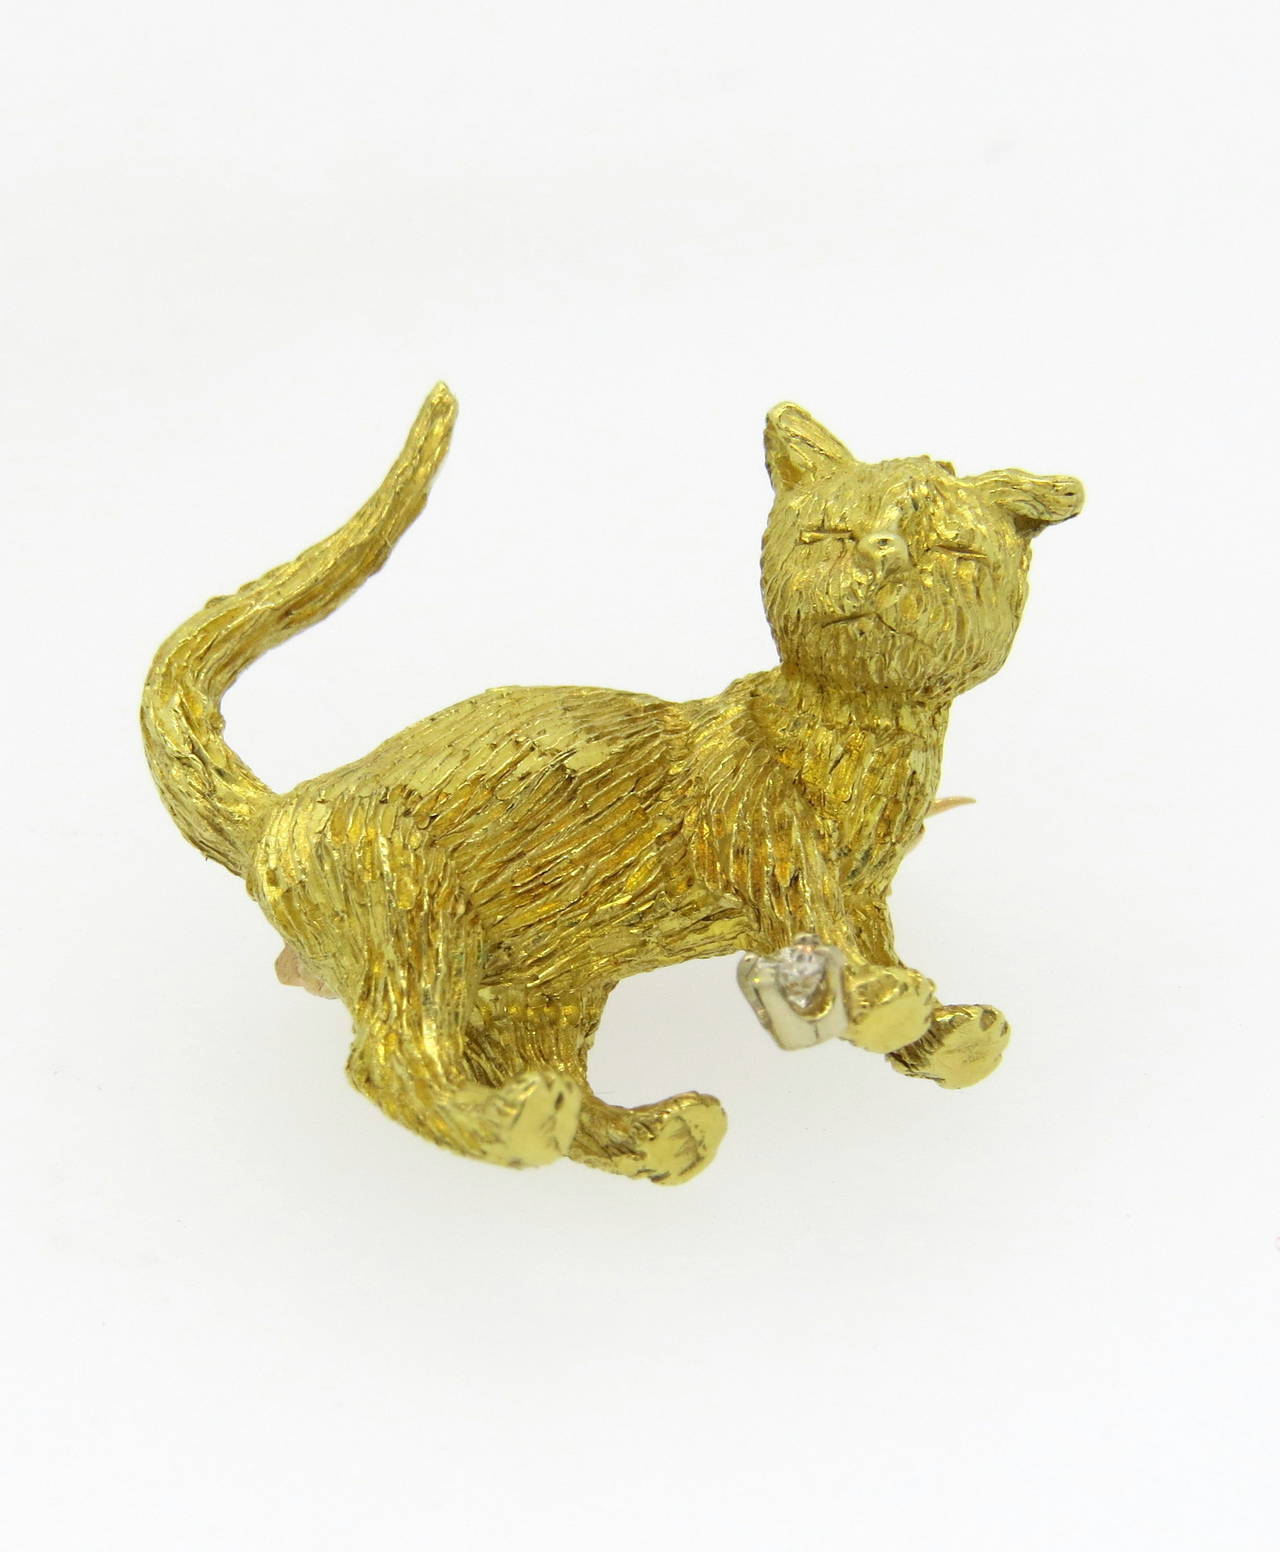 18k gold brooch, decorated with one 0.06ct diamond , featuring a cat. Brooch measures 28mm x 27mm. Weight of the piece - 8 grams